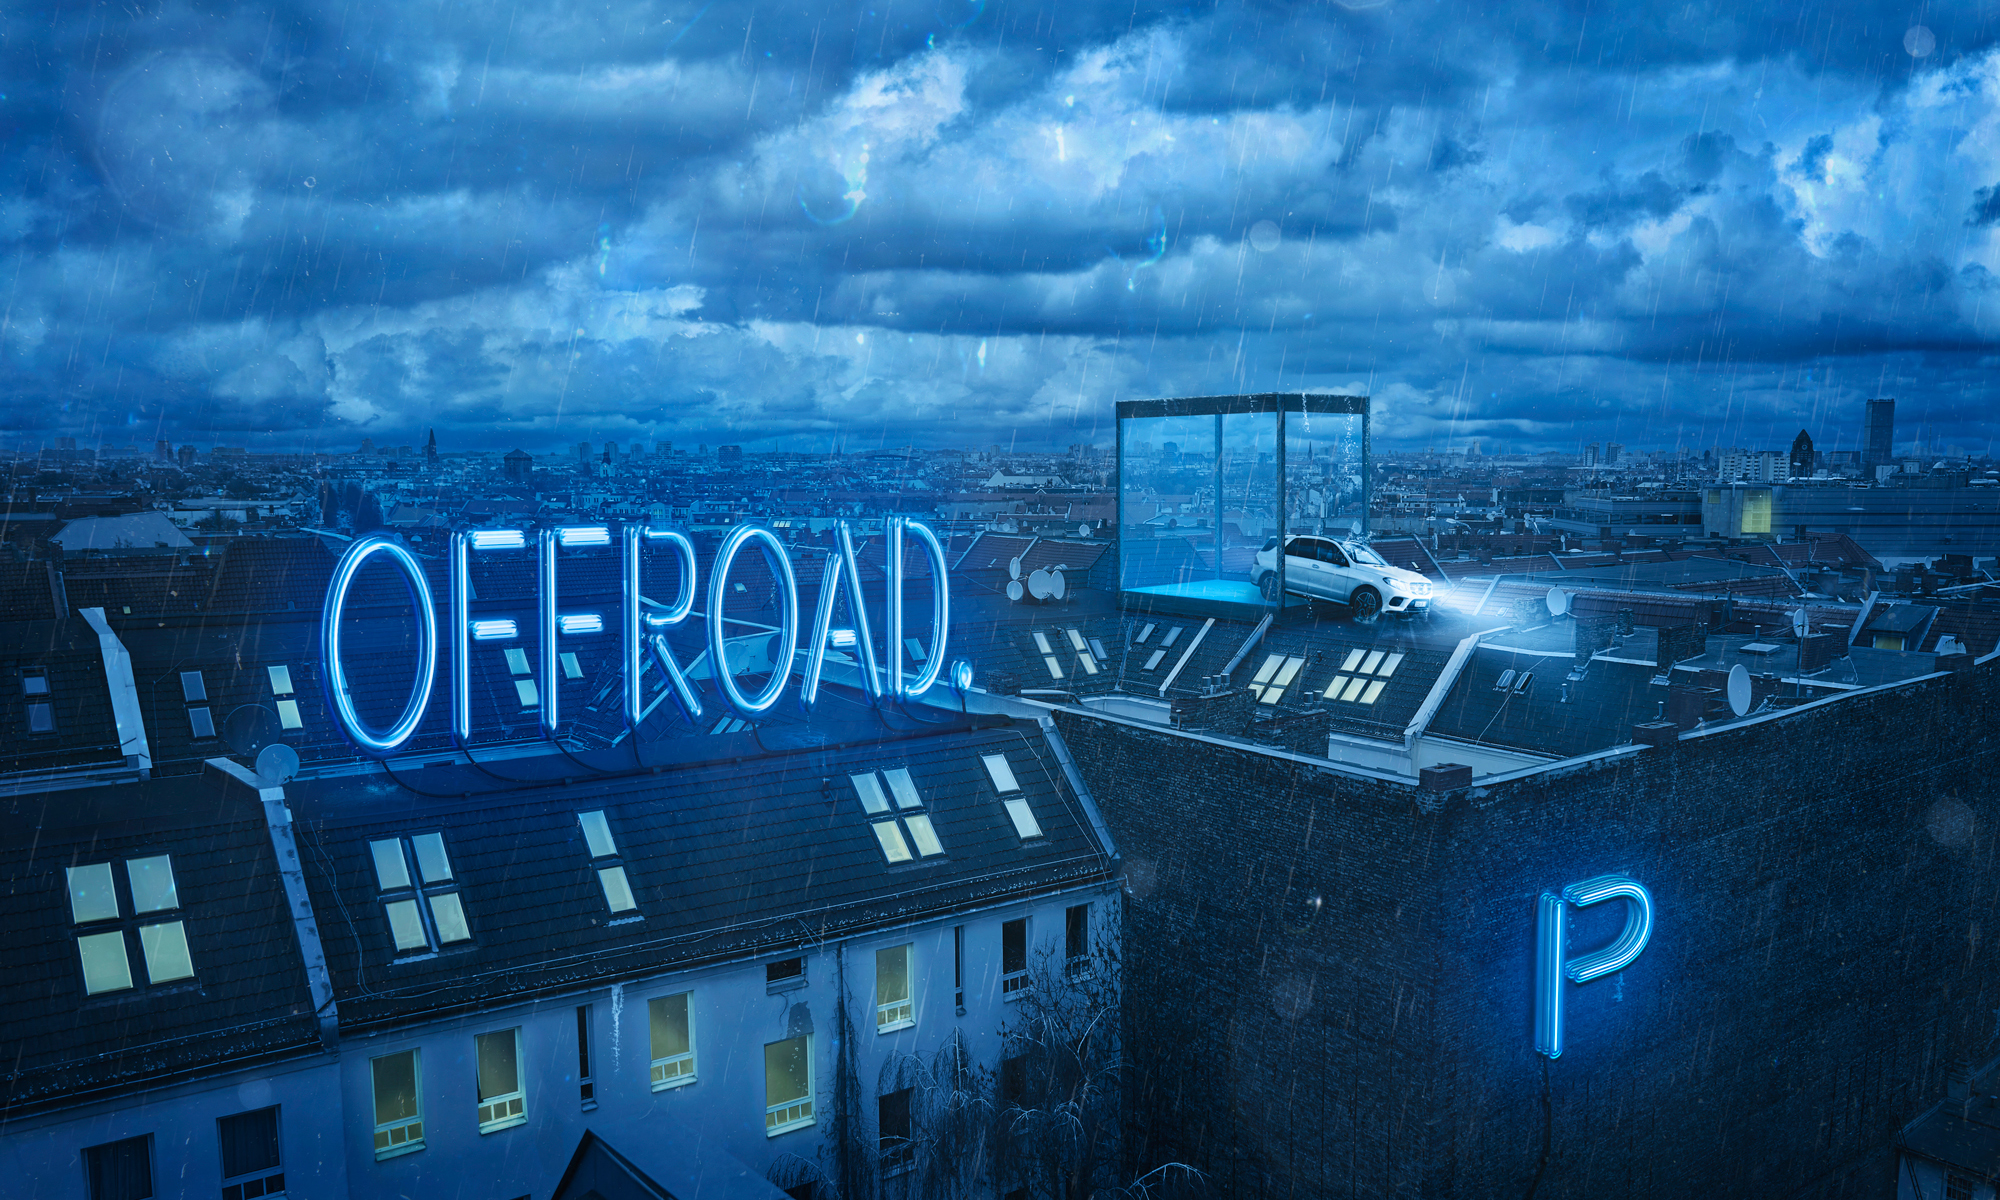 Commercial Advertisement Composing Landscape Ad Photoshop Composite 3D Photography - by Julian Erksmeyer 2016 Mercedes Car Rooftop Offroad Citylife City